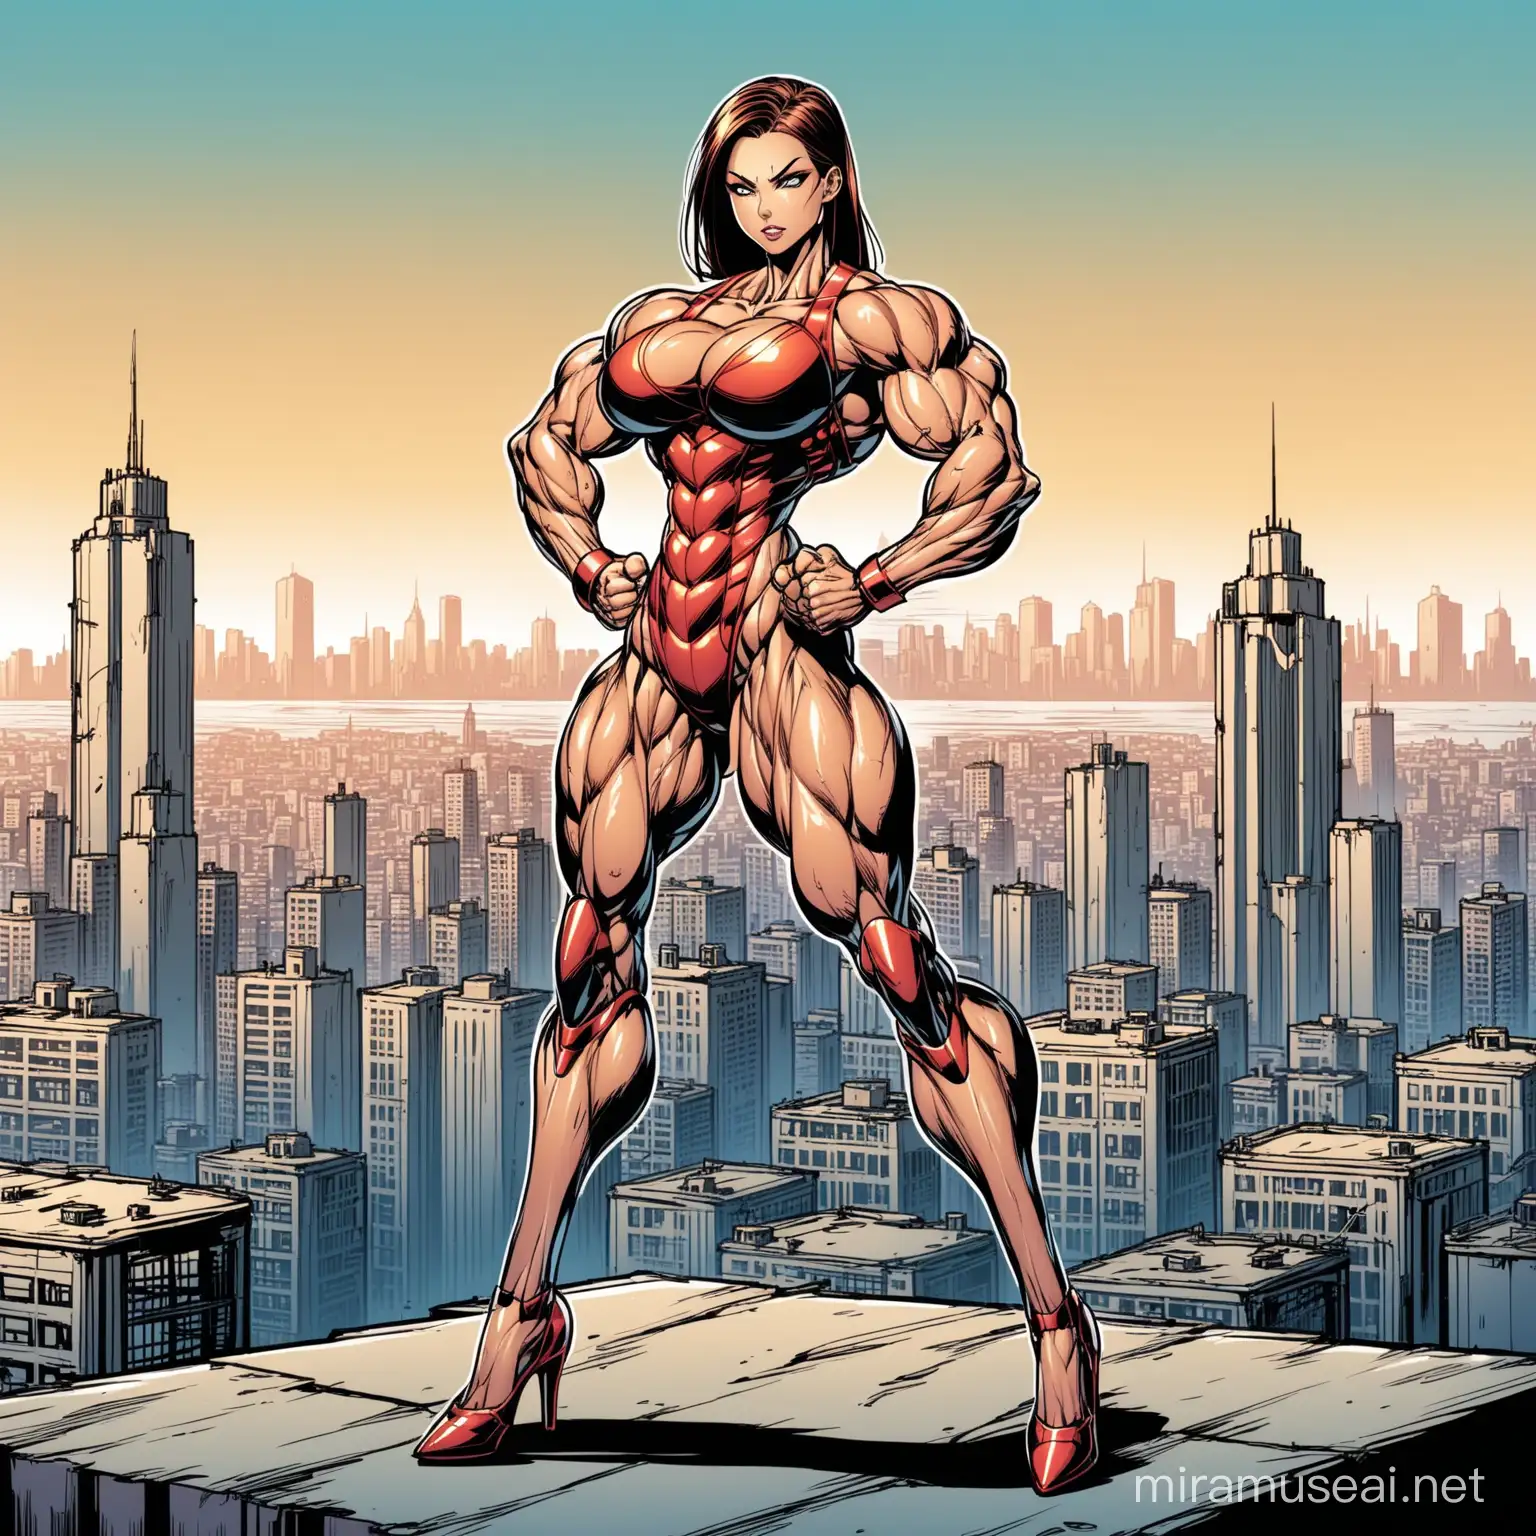 Muscular Female Robot Flexing in Comic Book Style Cityscape